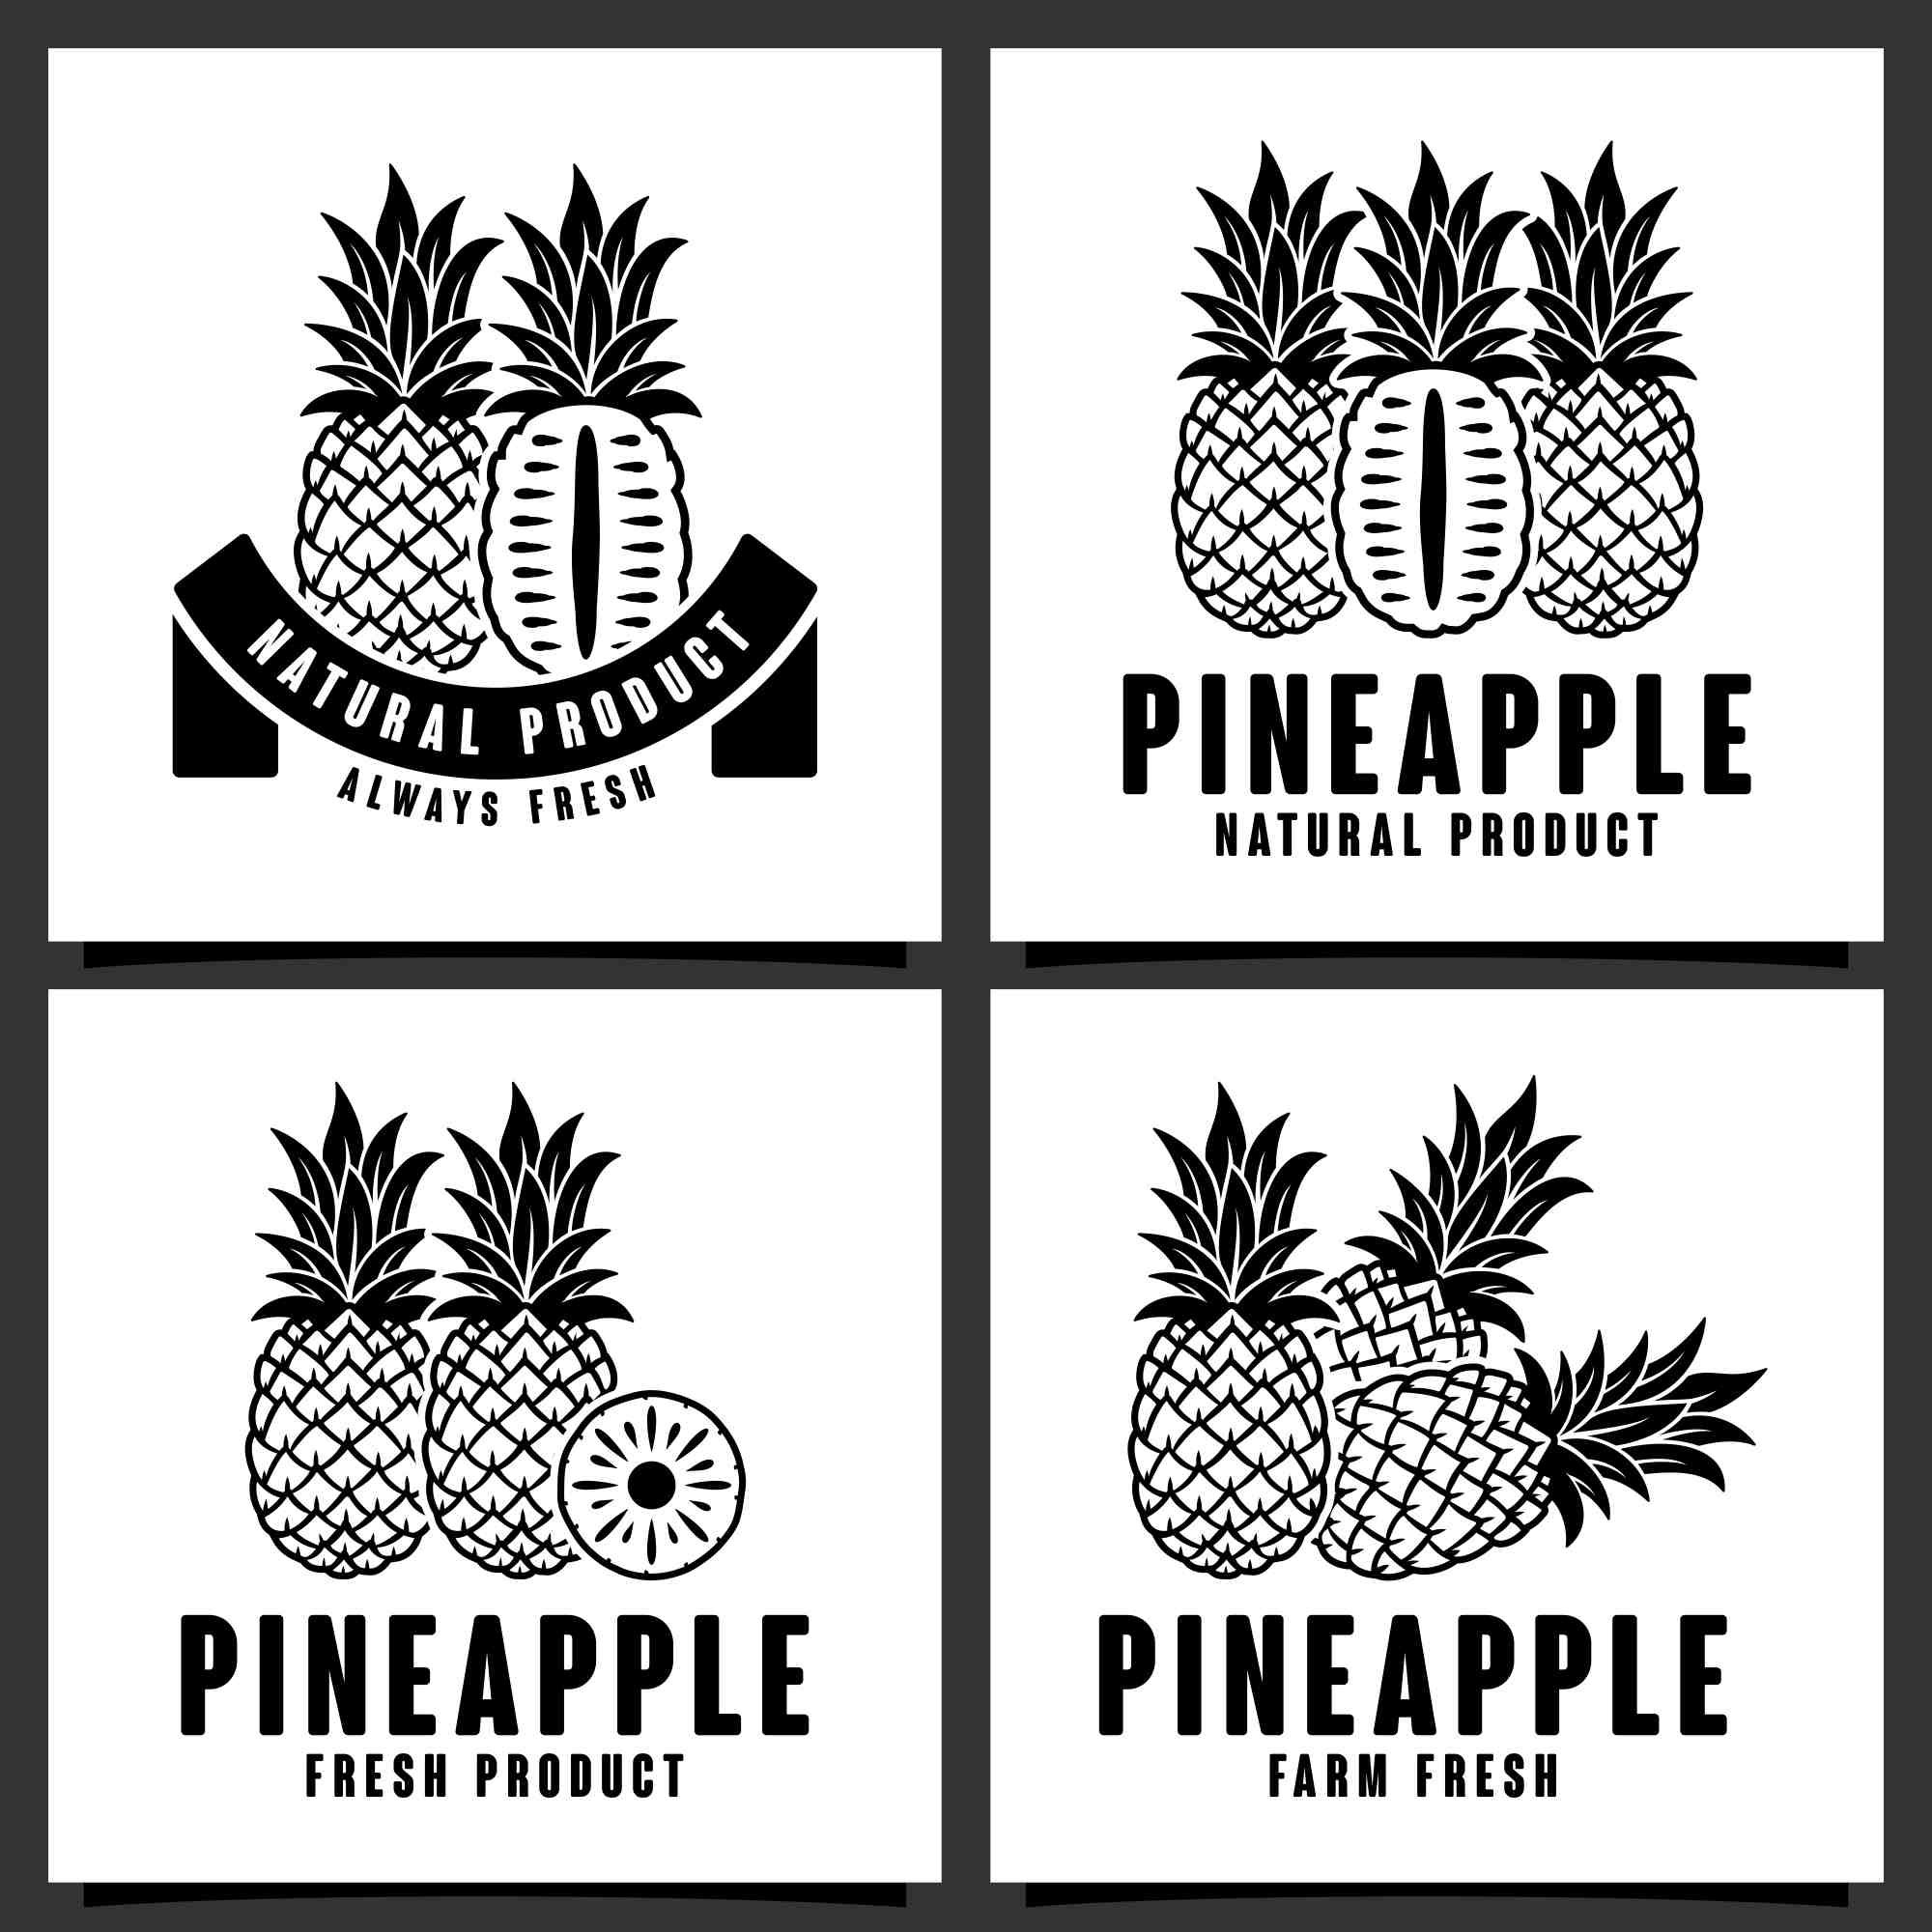 19 Set Pineapple vector logo design collection - $8 preview image.